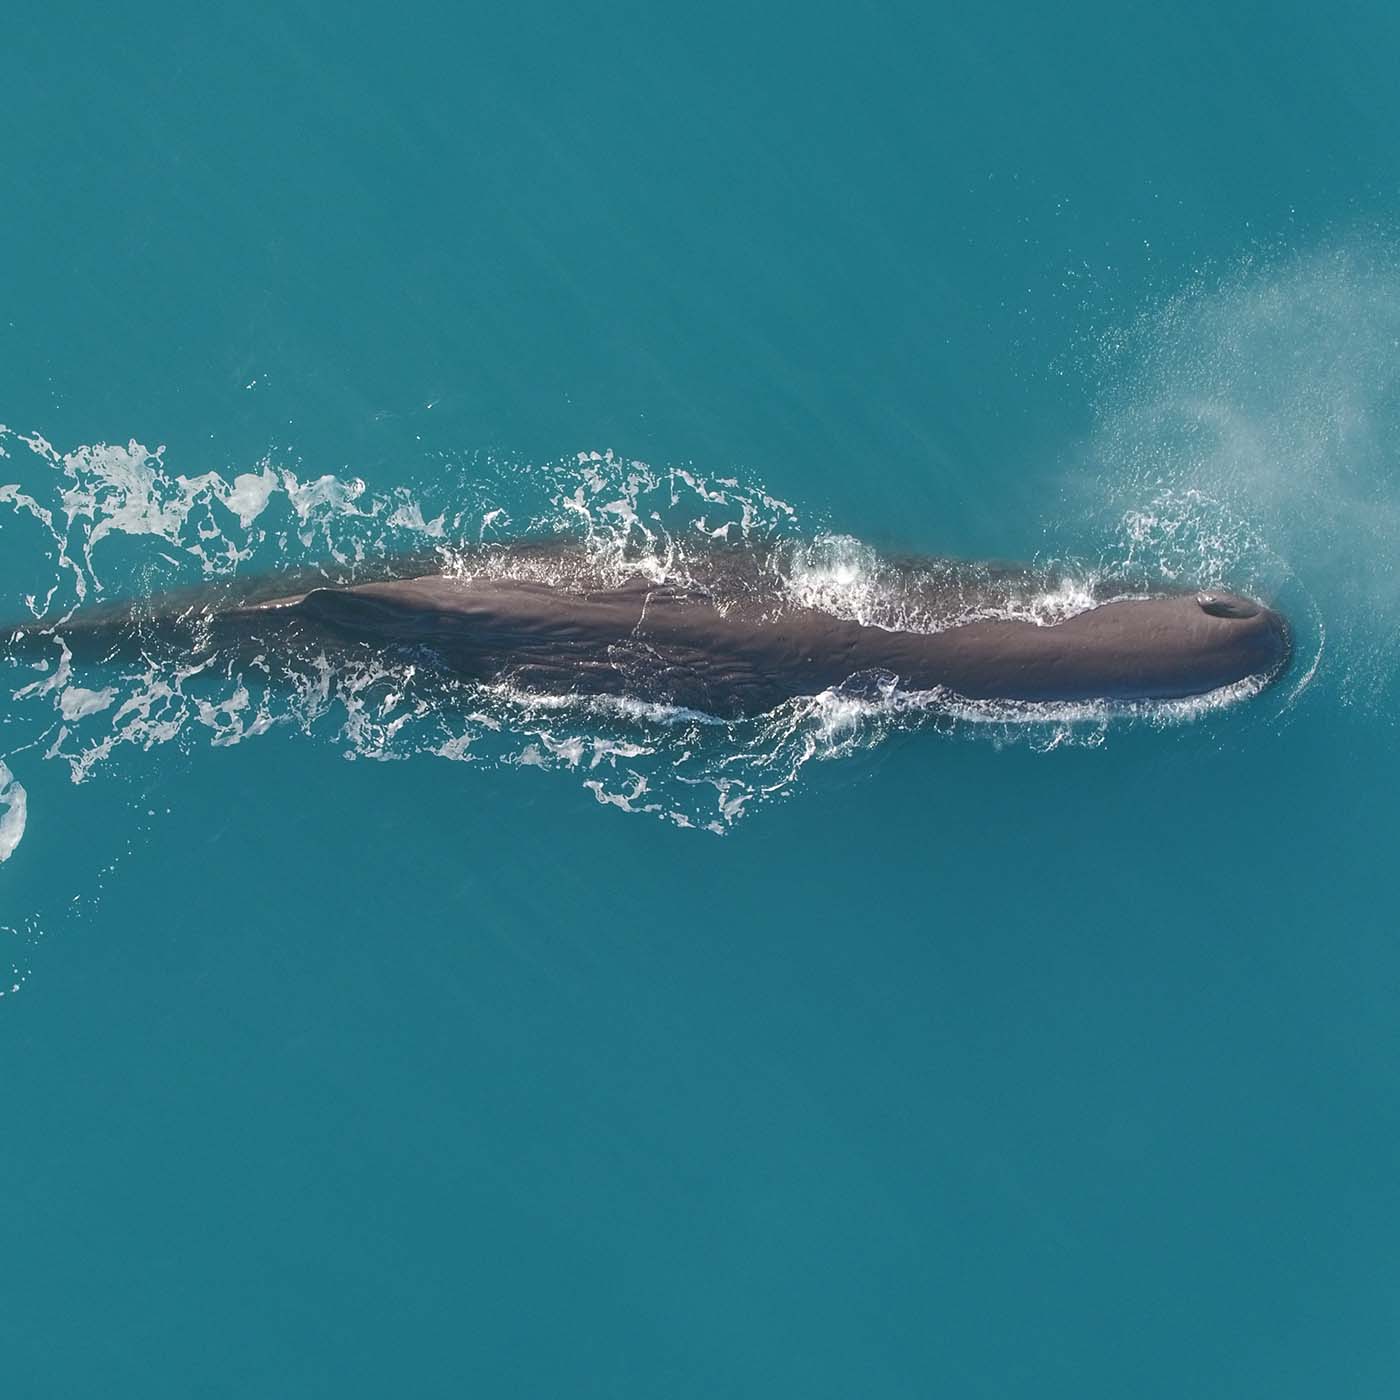 View from above of a whale in the ocean